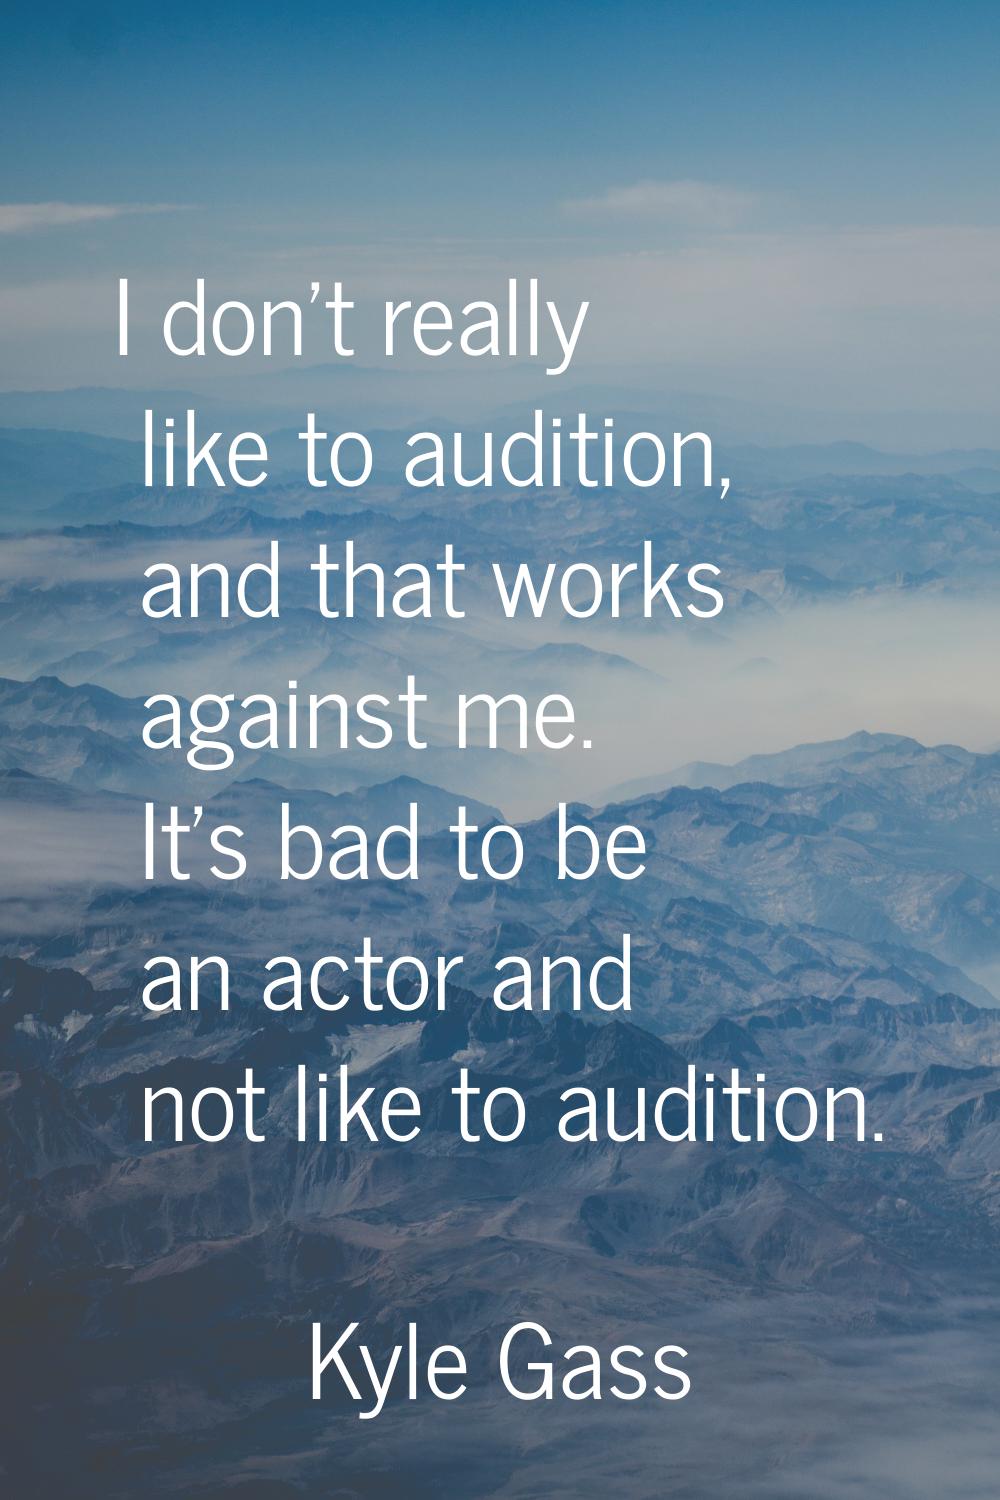 I don't really like to audition, and that works against me. It's bad to be an actor and not like to